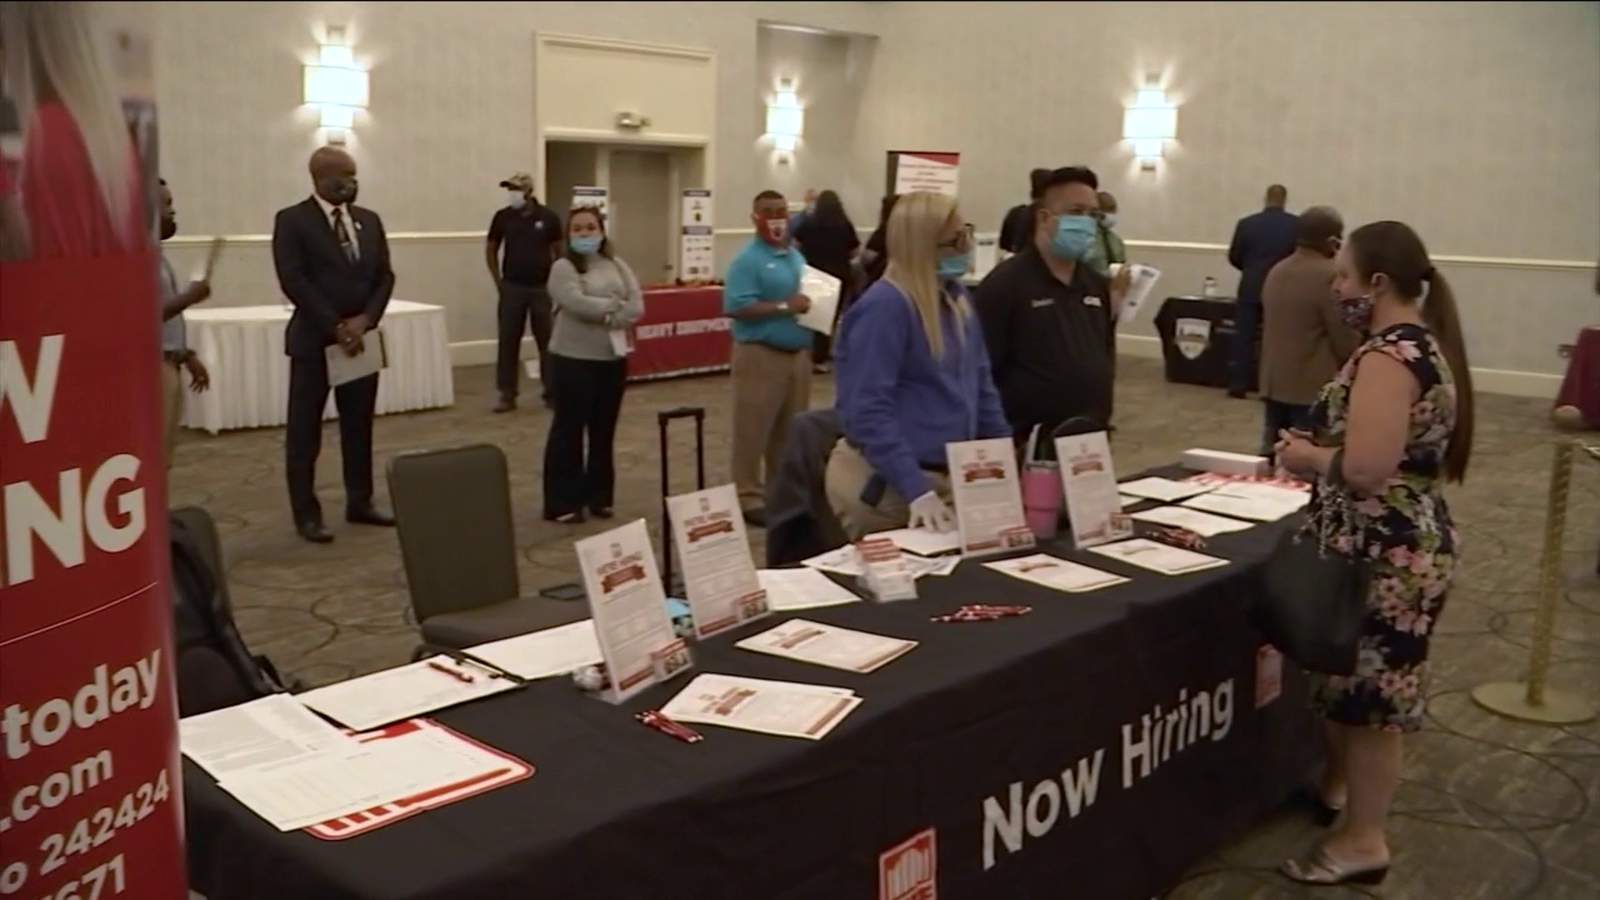 Jacksonville hiring event: 500 jobs available from dozens of companies